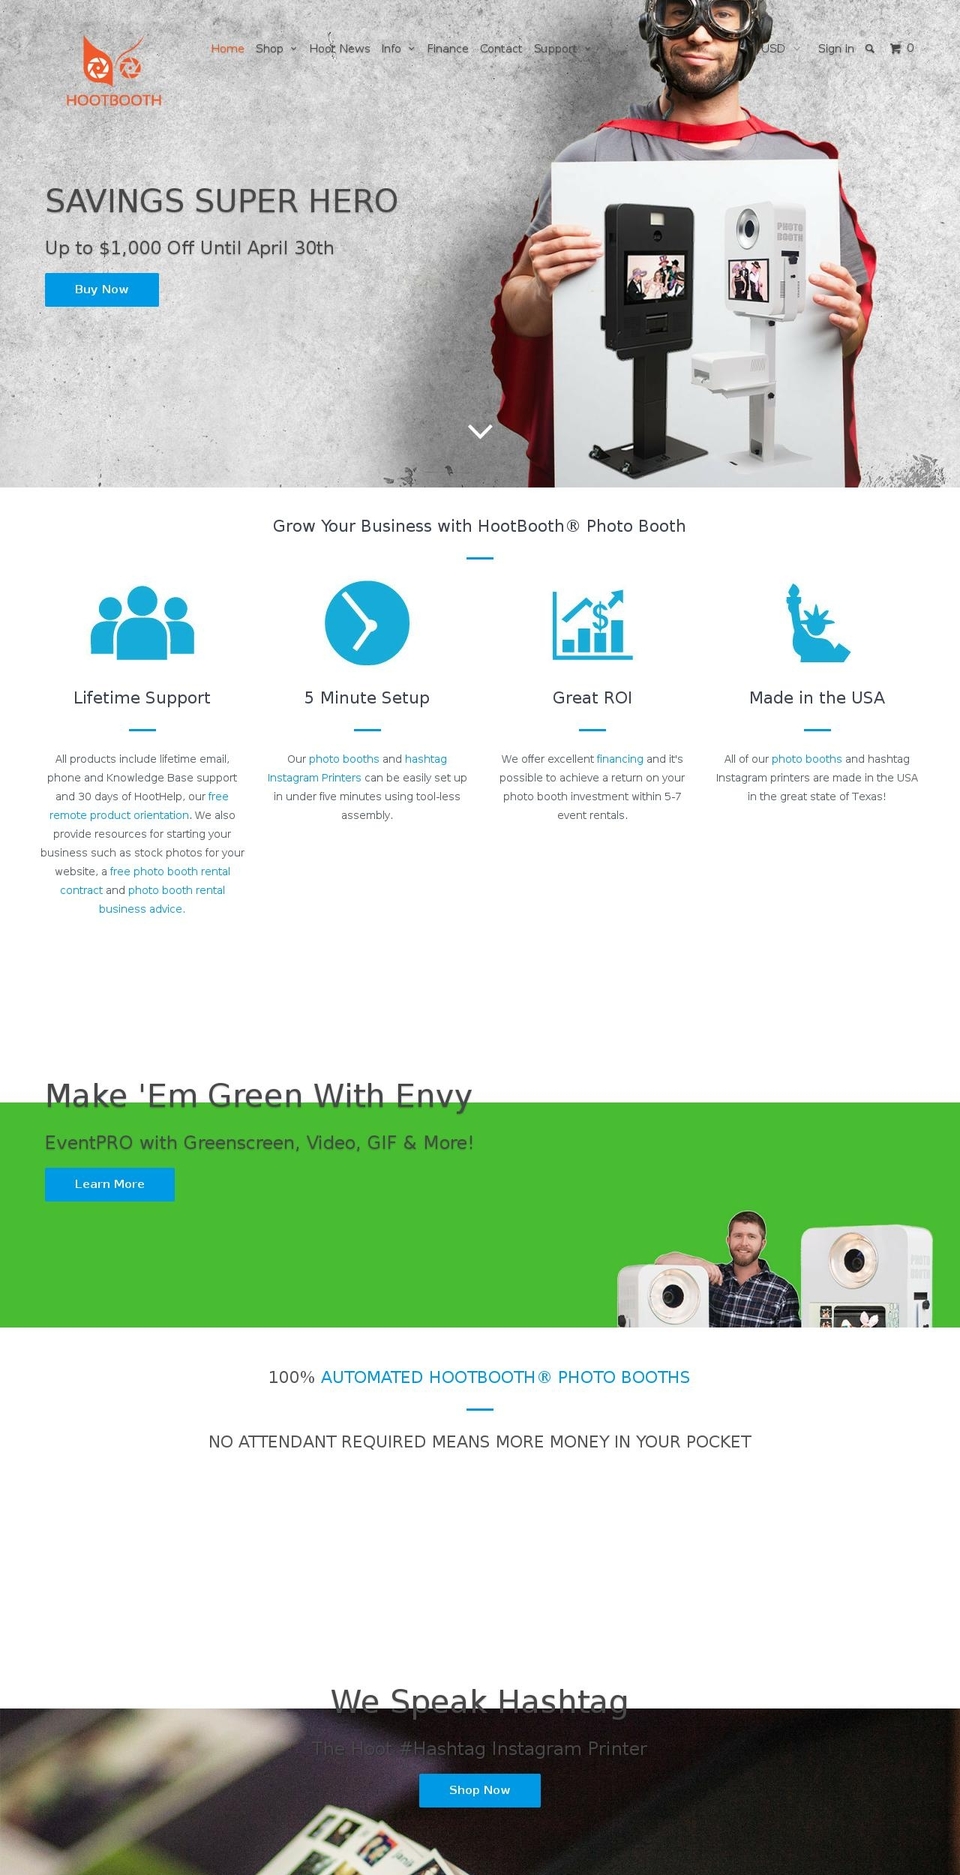 turbo Shopify theme site example hootboothphotobooth.com